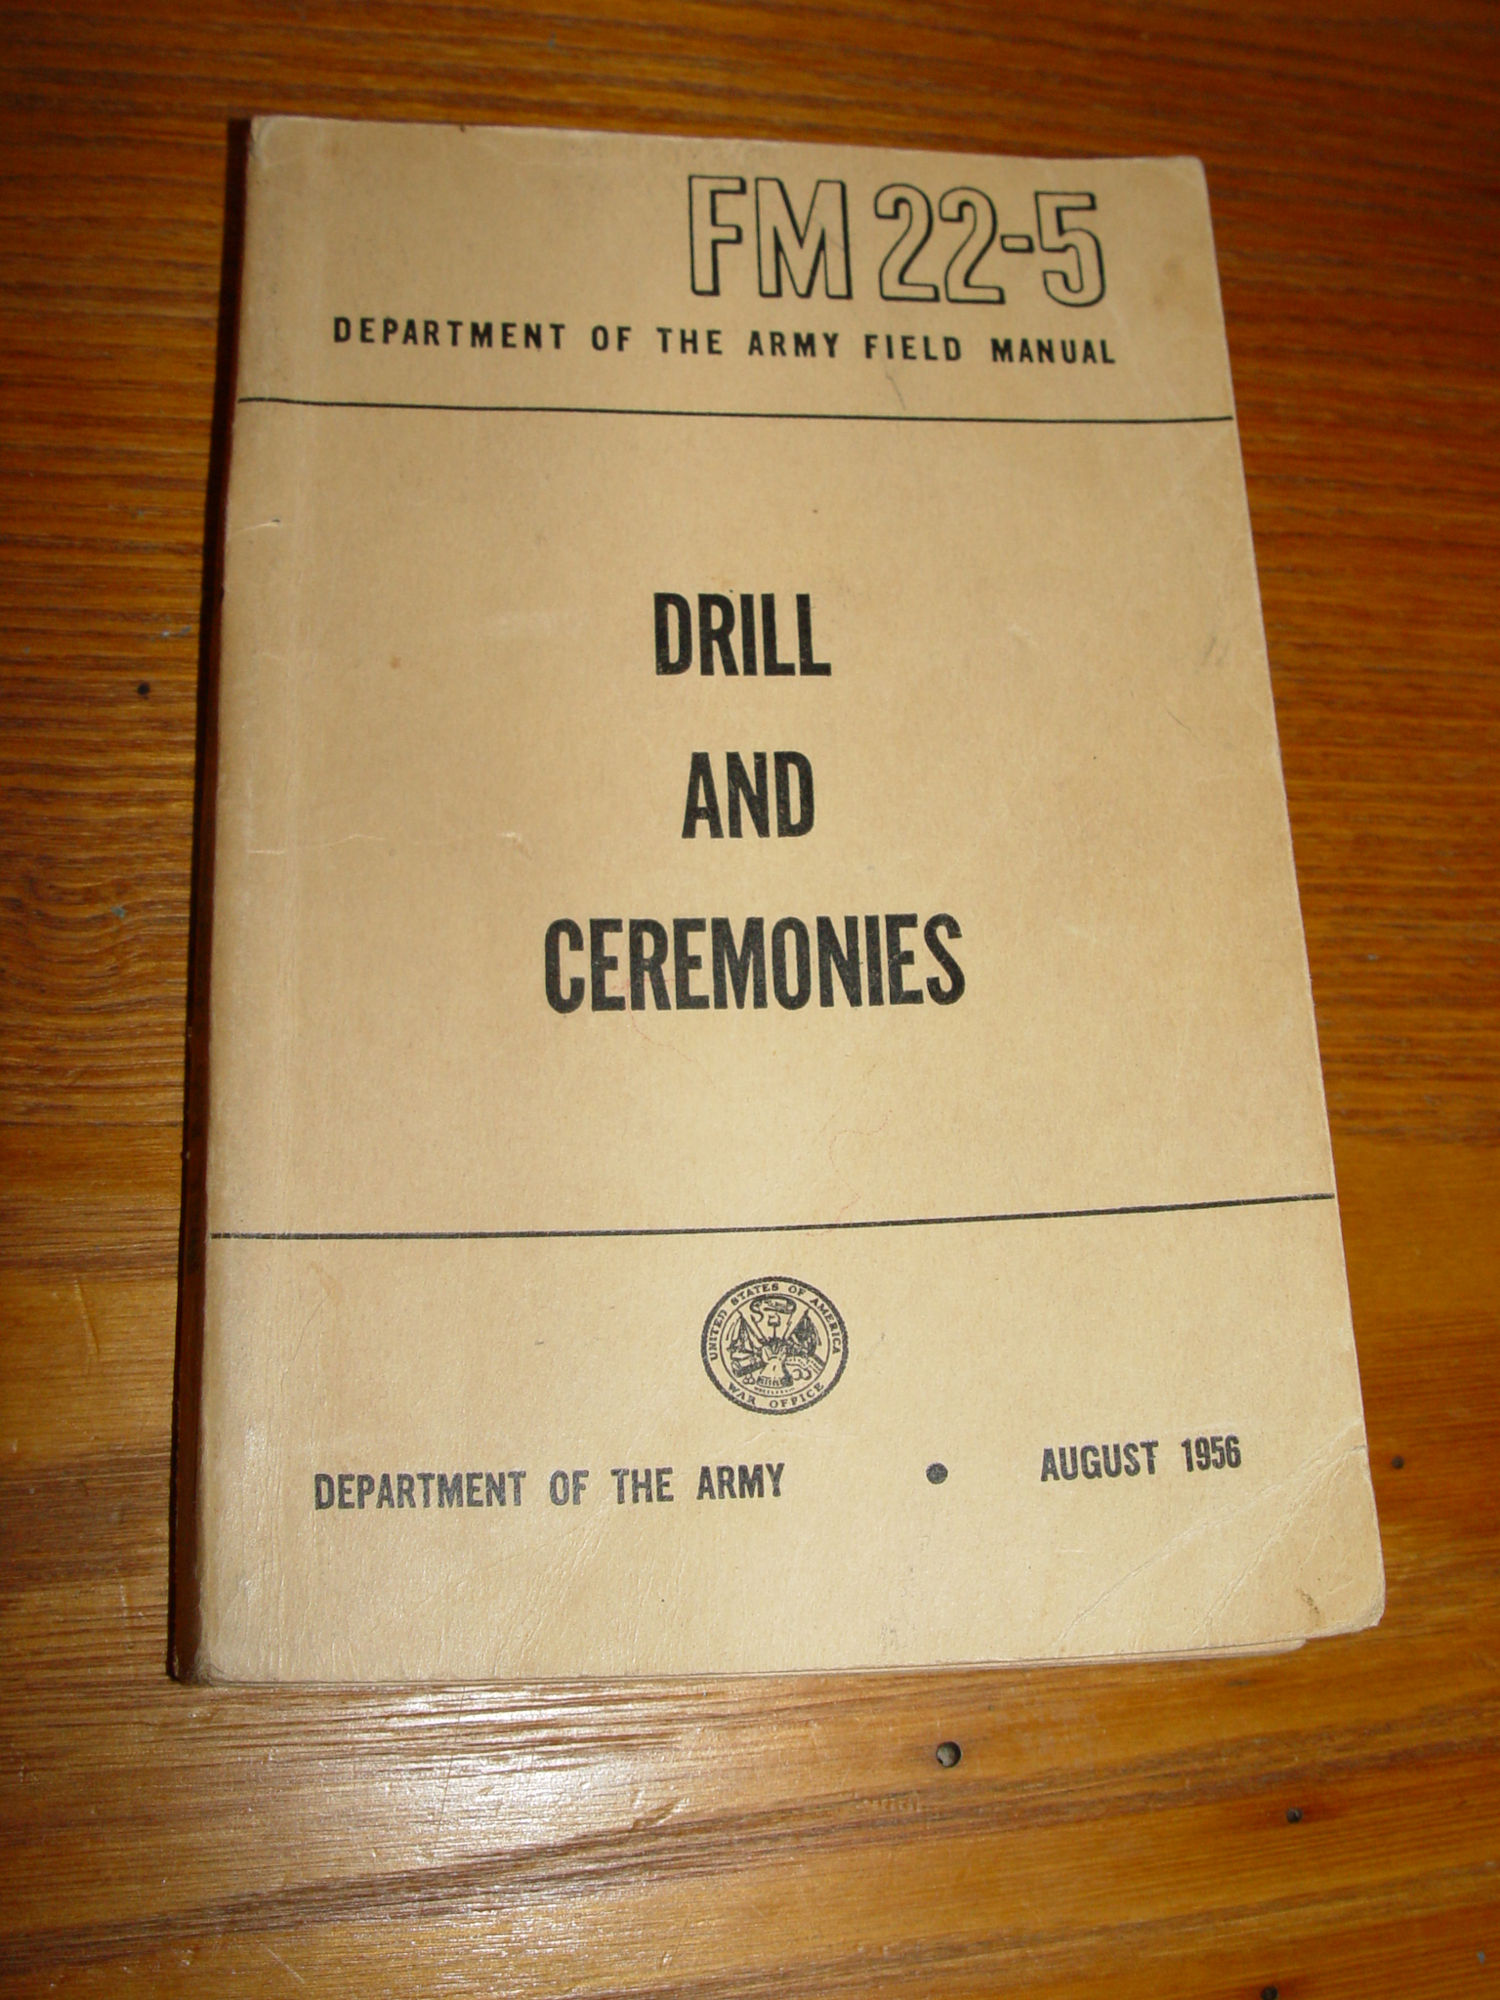 FM 22-5 Drill and
                        Ceremonies Dept. of the Army 1956